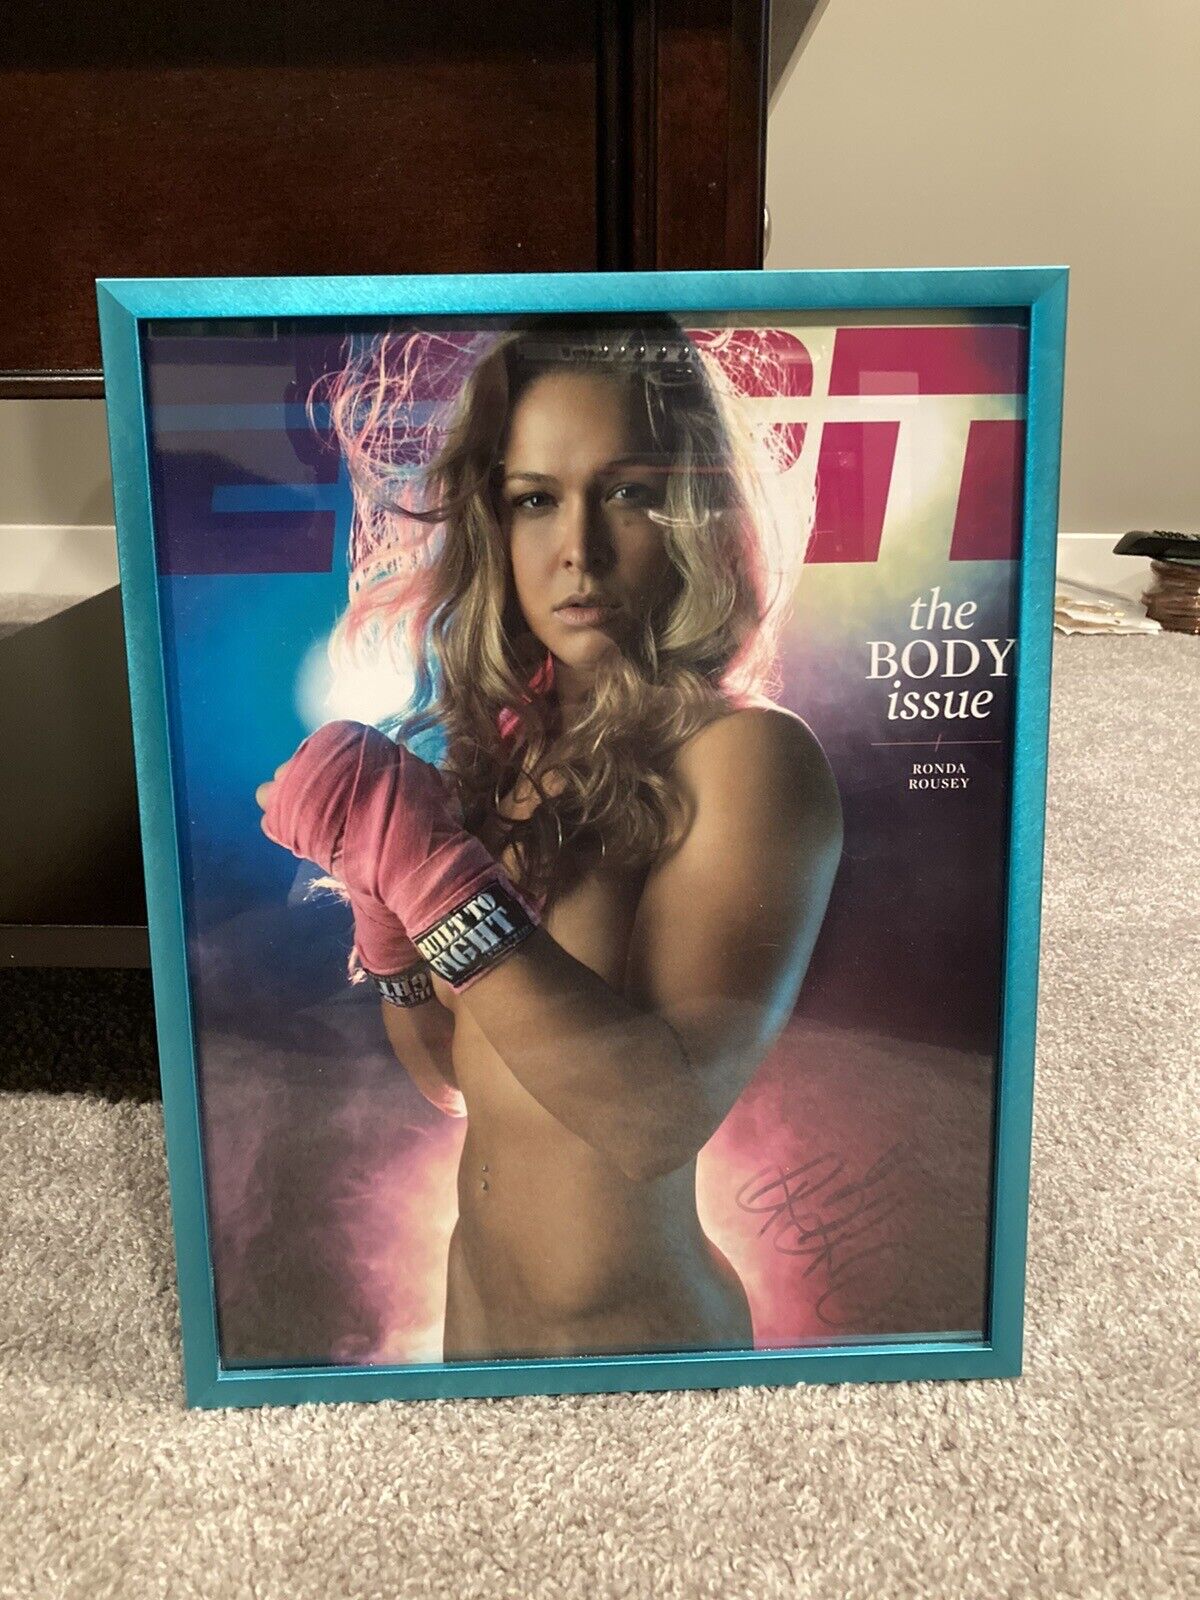 cory cordell recommends ronda rousey espn cover pic